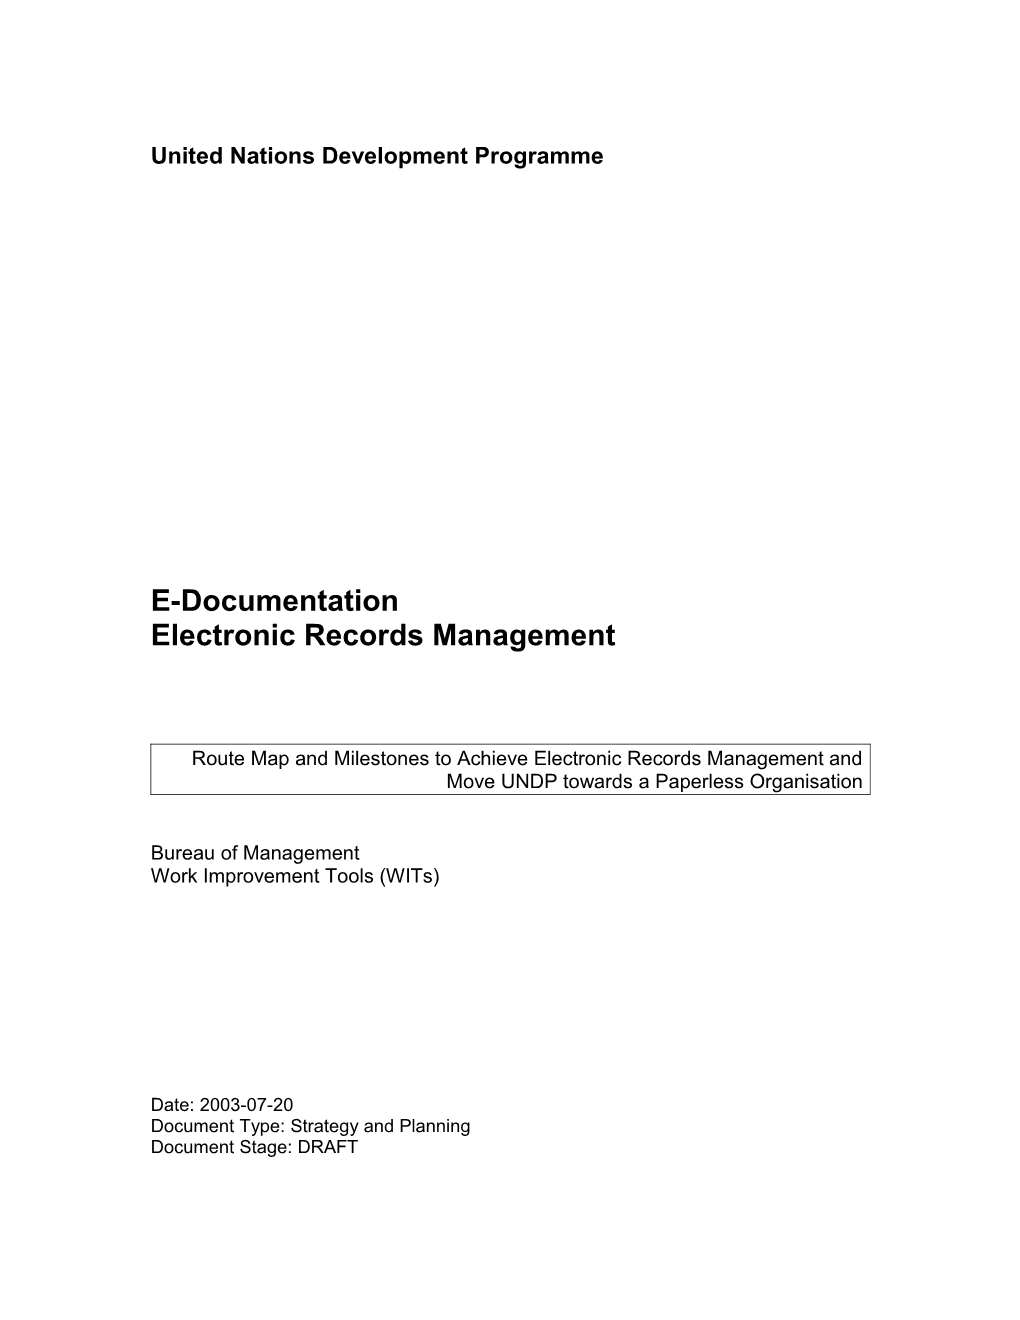 Electronic Records Management Route Map